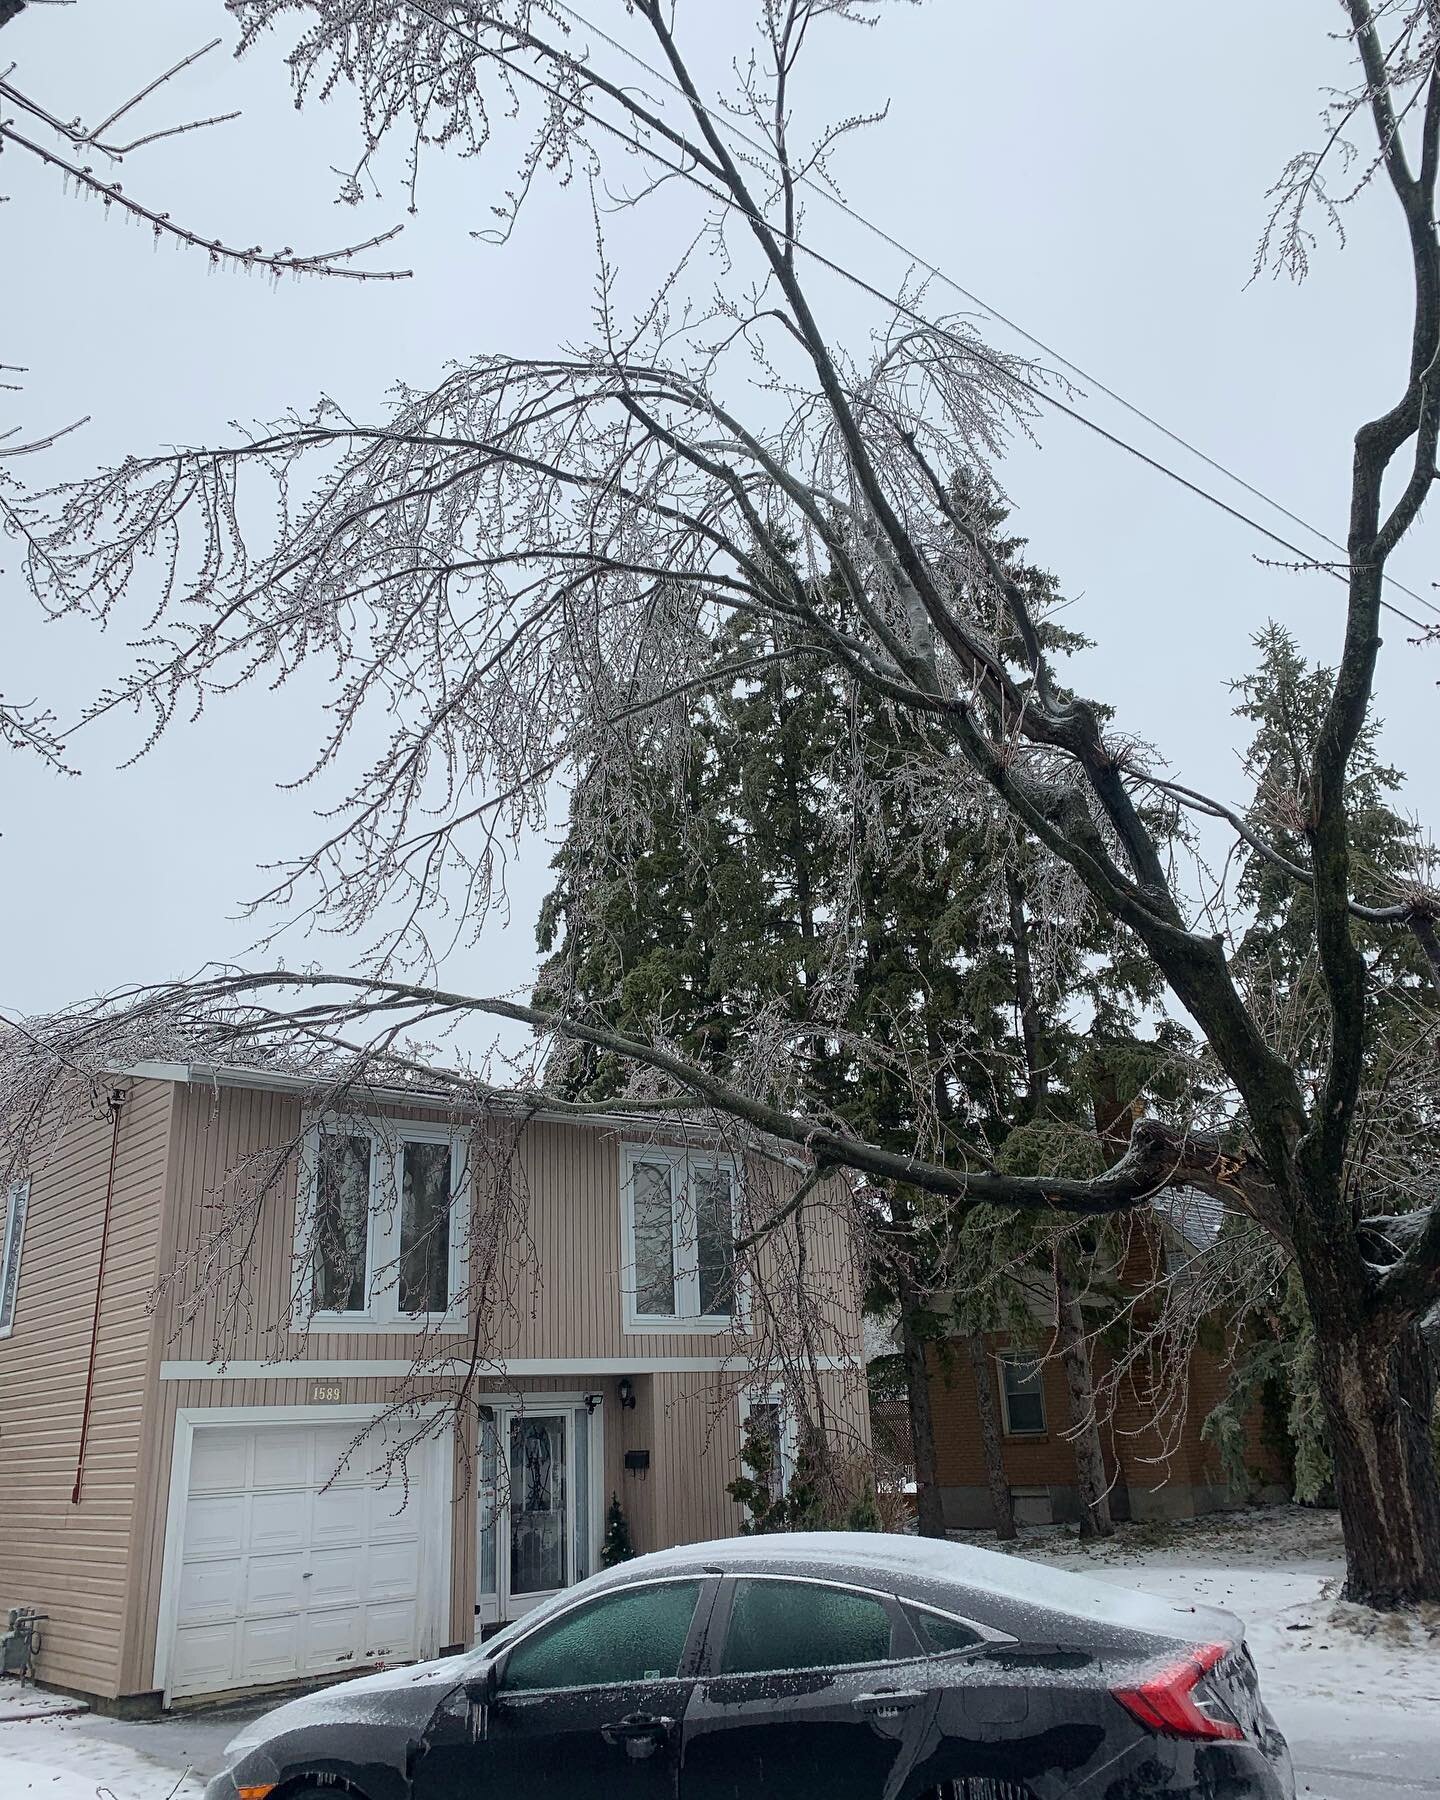 Lots of damage after today&rsquo;s storm! 
We&rsquo;re thawing out the equipment and will be working hard to help clean-up!
Give us a call if your trees have been impacted!
🥶 🌲